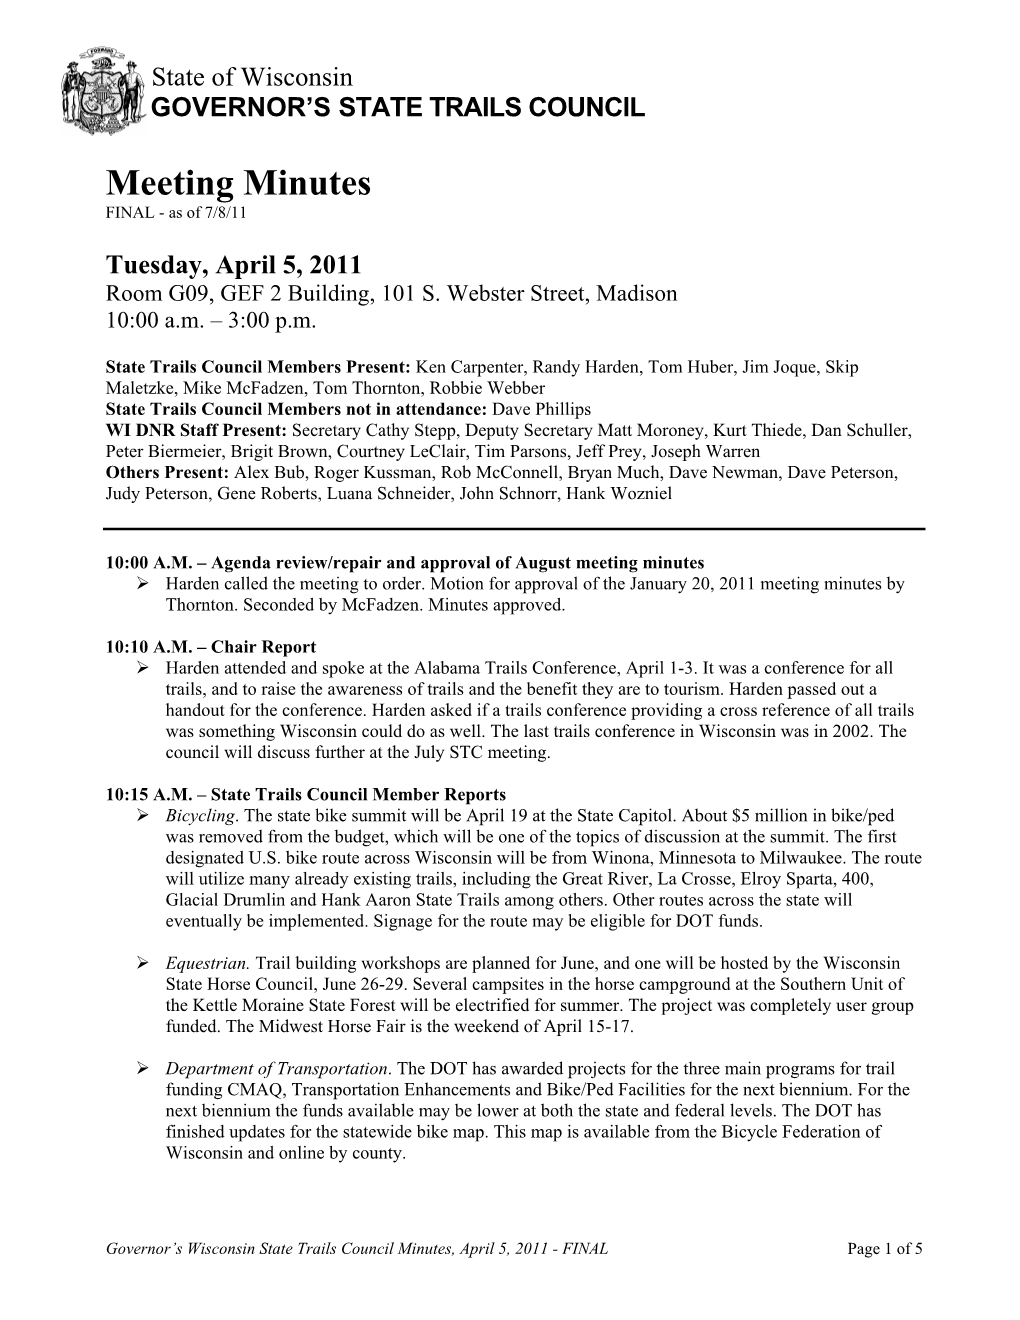 Meeting Minutes FINAL - As of 7/8/11